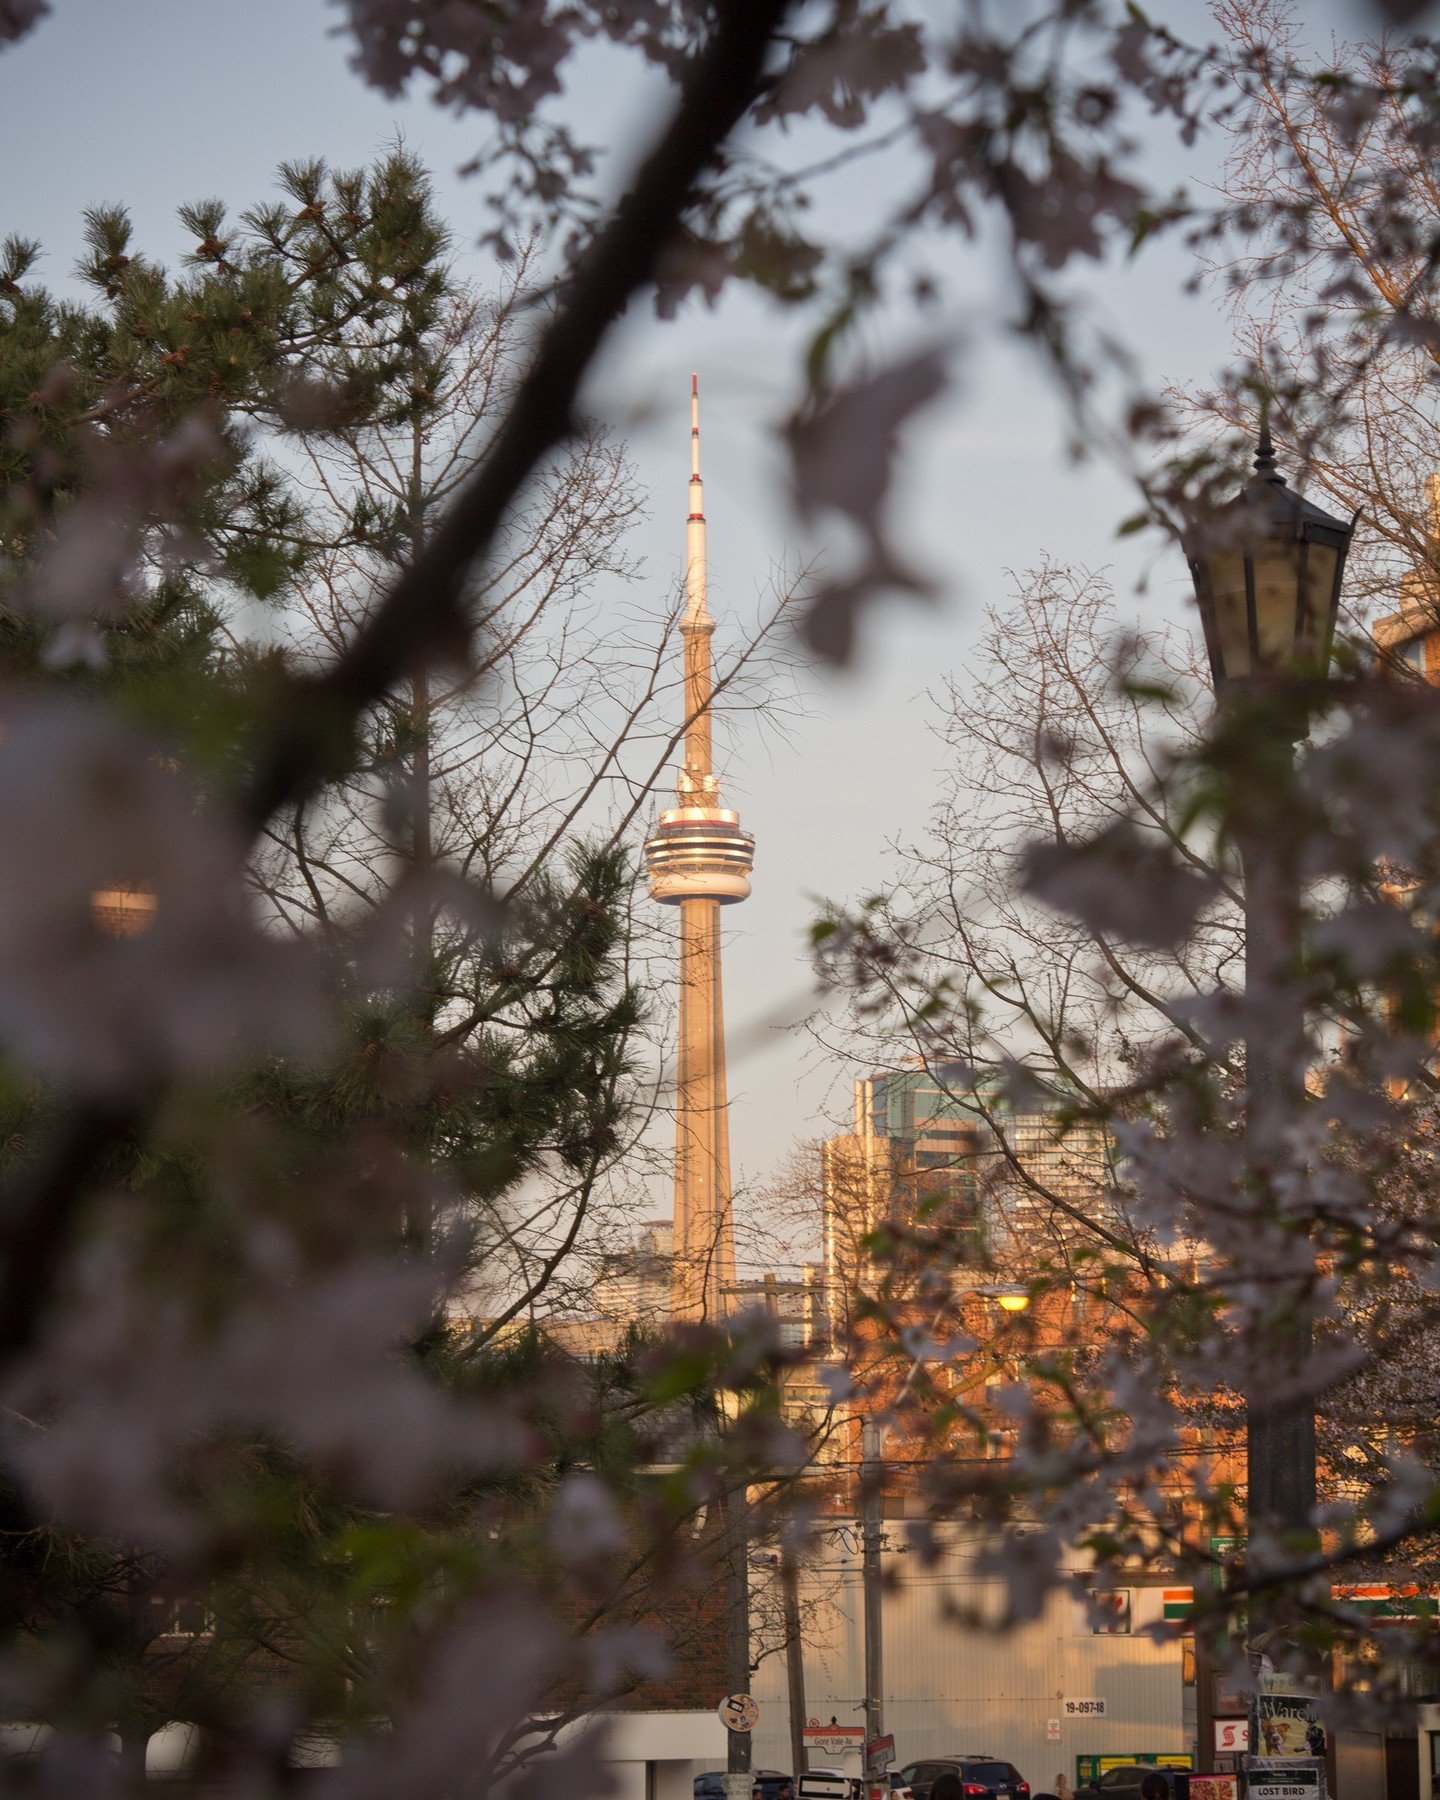 Some more photos from our anniversary weekend trip to Toronto, Ontario:

📍Cherry blossoms with a view of the CN Tower in Trinity Bellwoods Park 🌸
📍Wild blueberry pancakes at Mildred's Temple Kitchen 😋

#toronto #torontoontario #canada #cherryblos